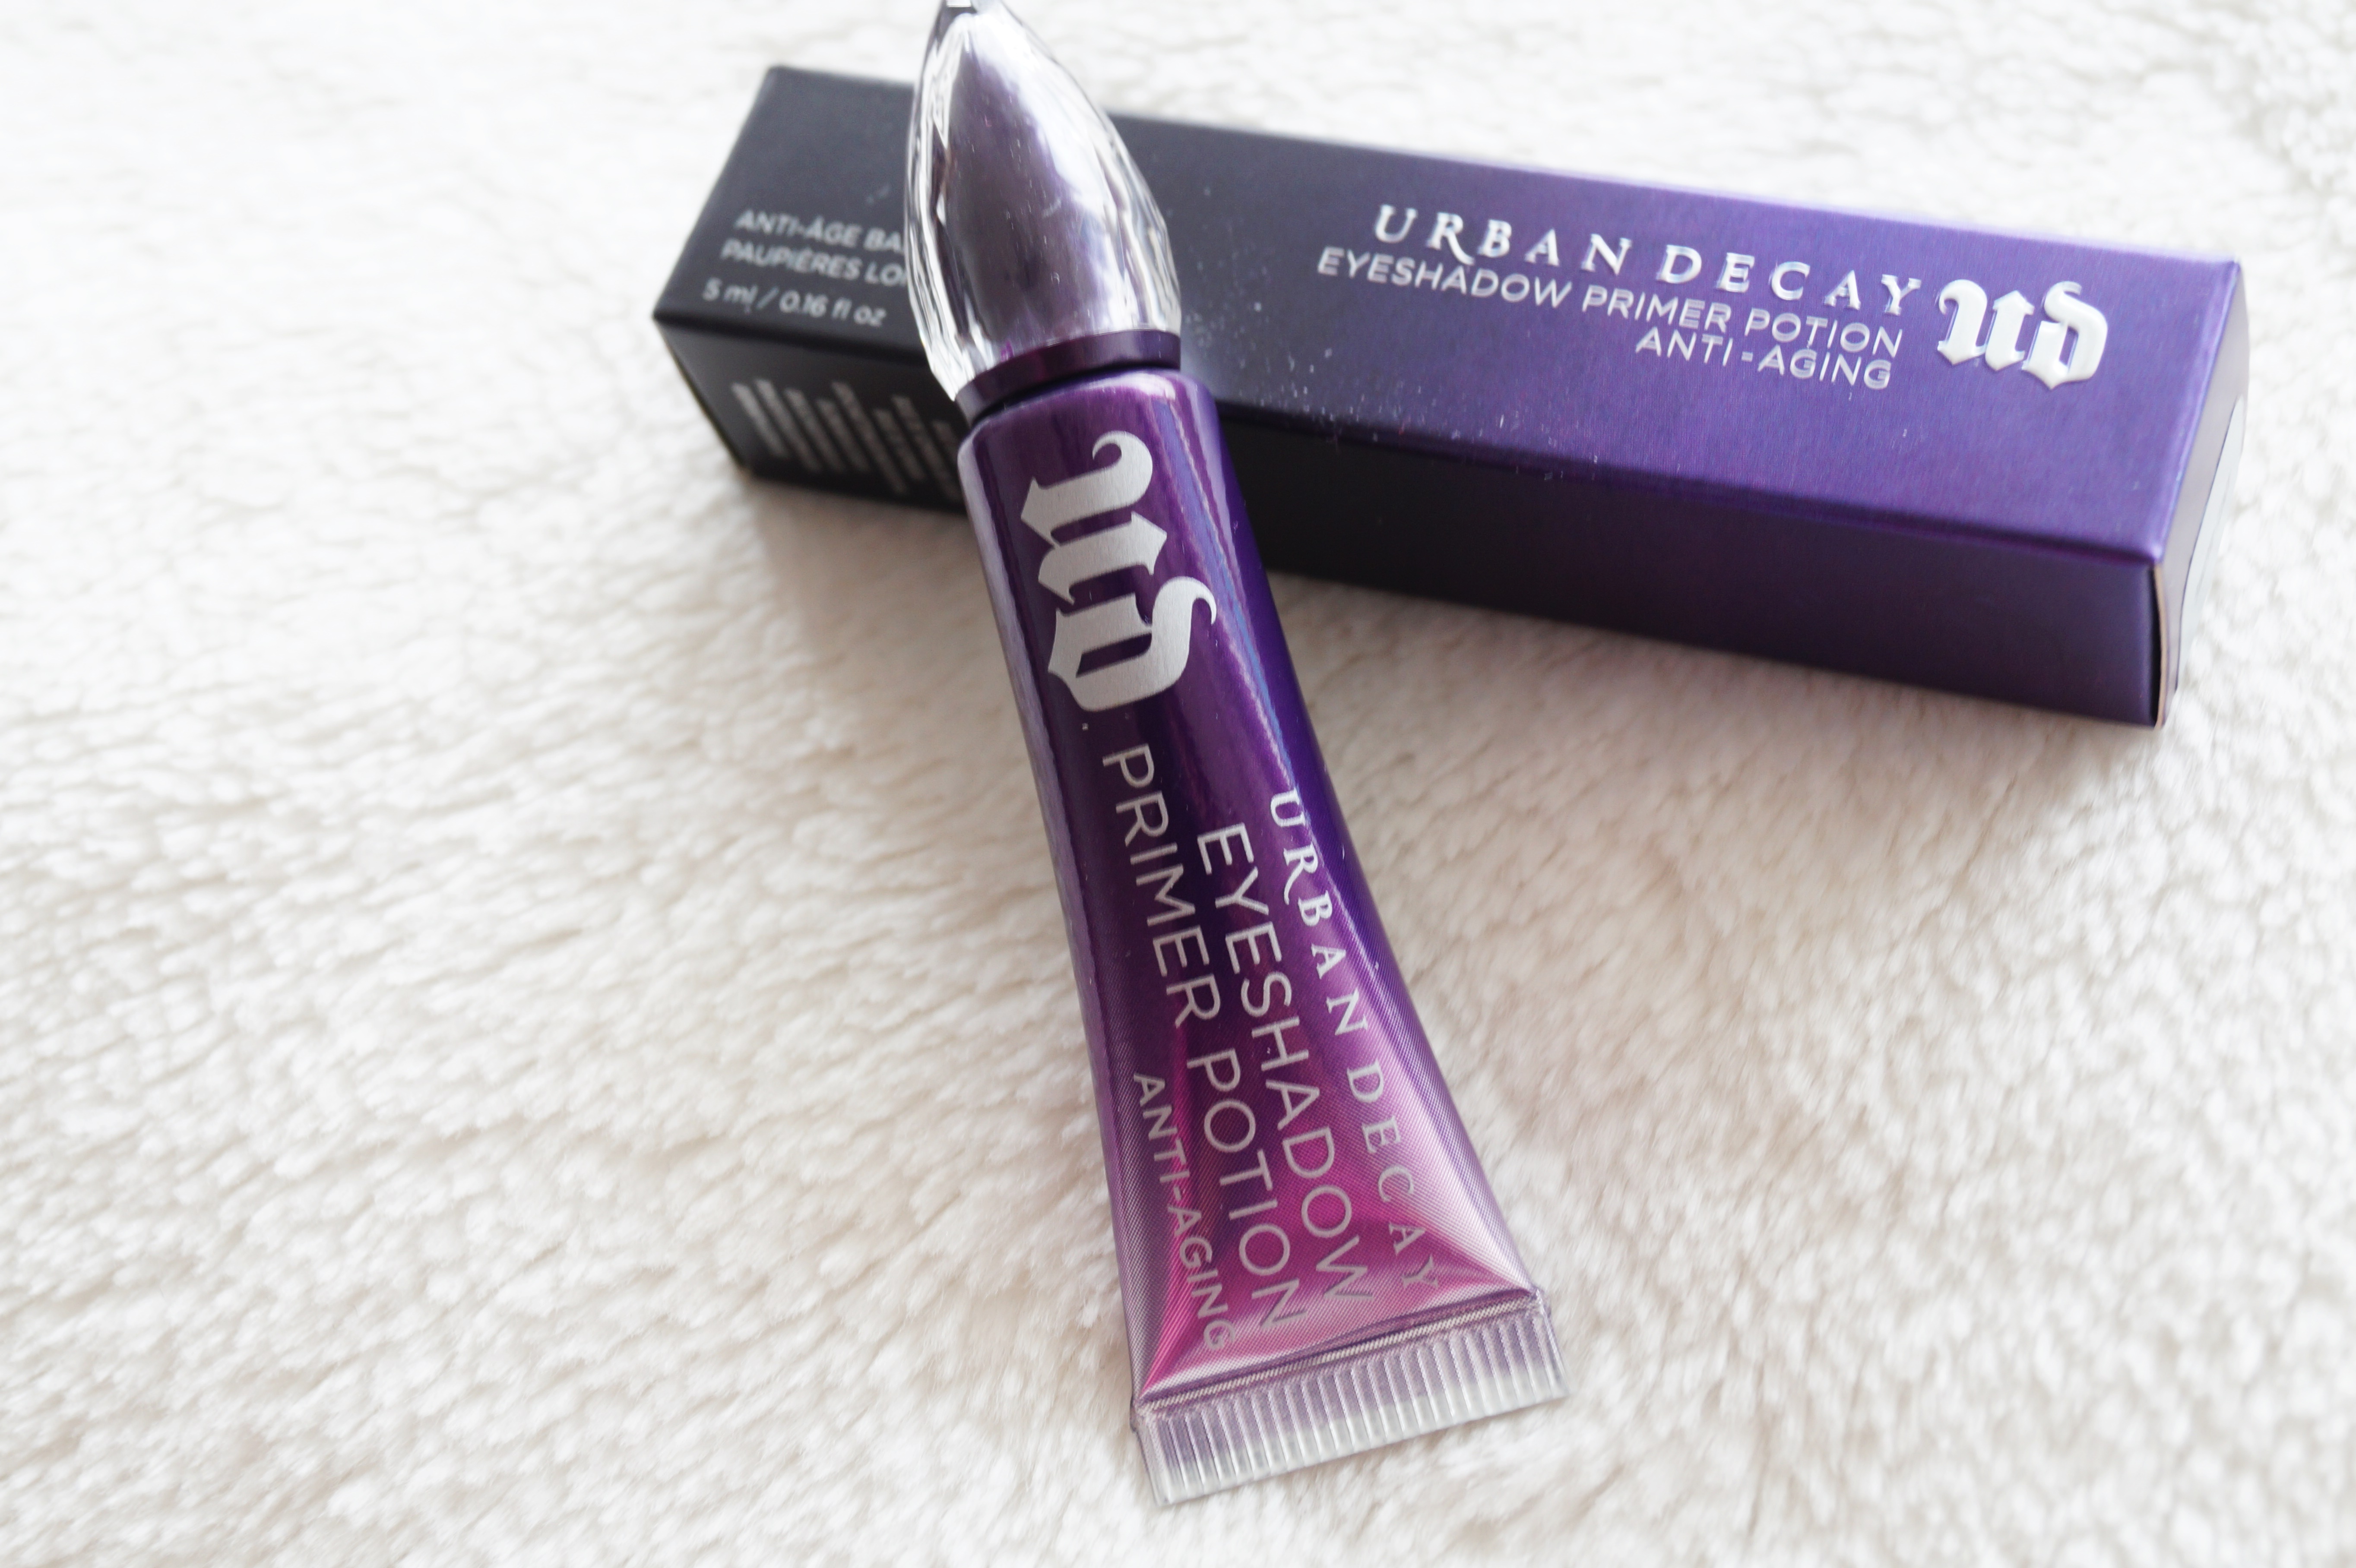 Today we are talking about the Eyeshadow Primer Potion Anti-aging by Urban Decay...